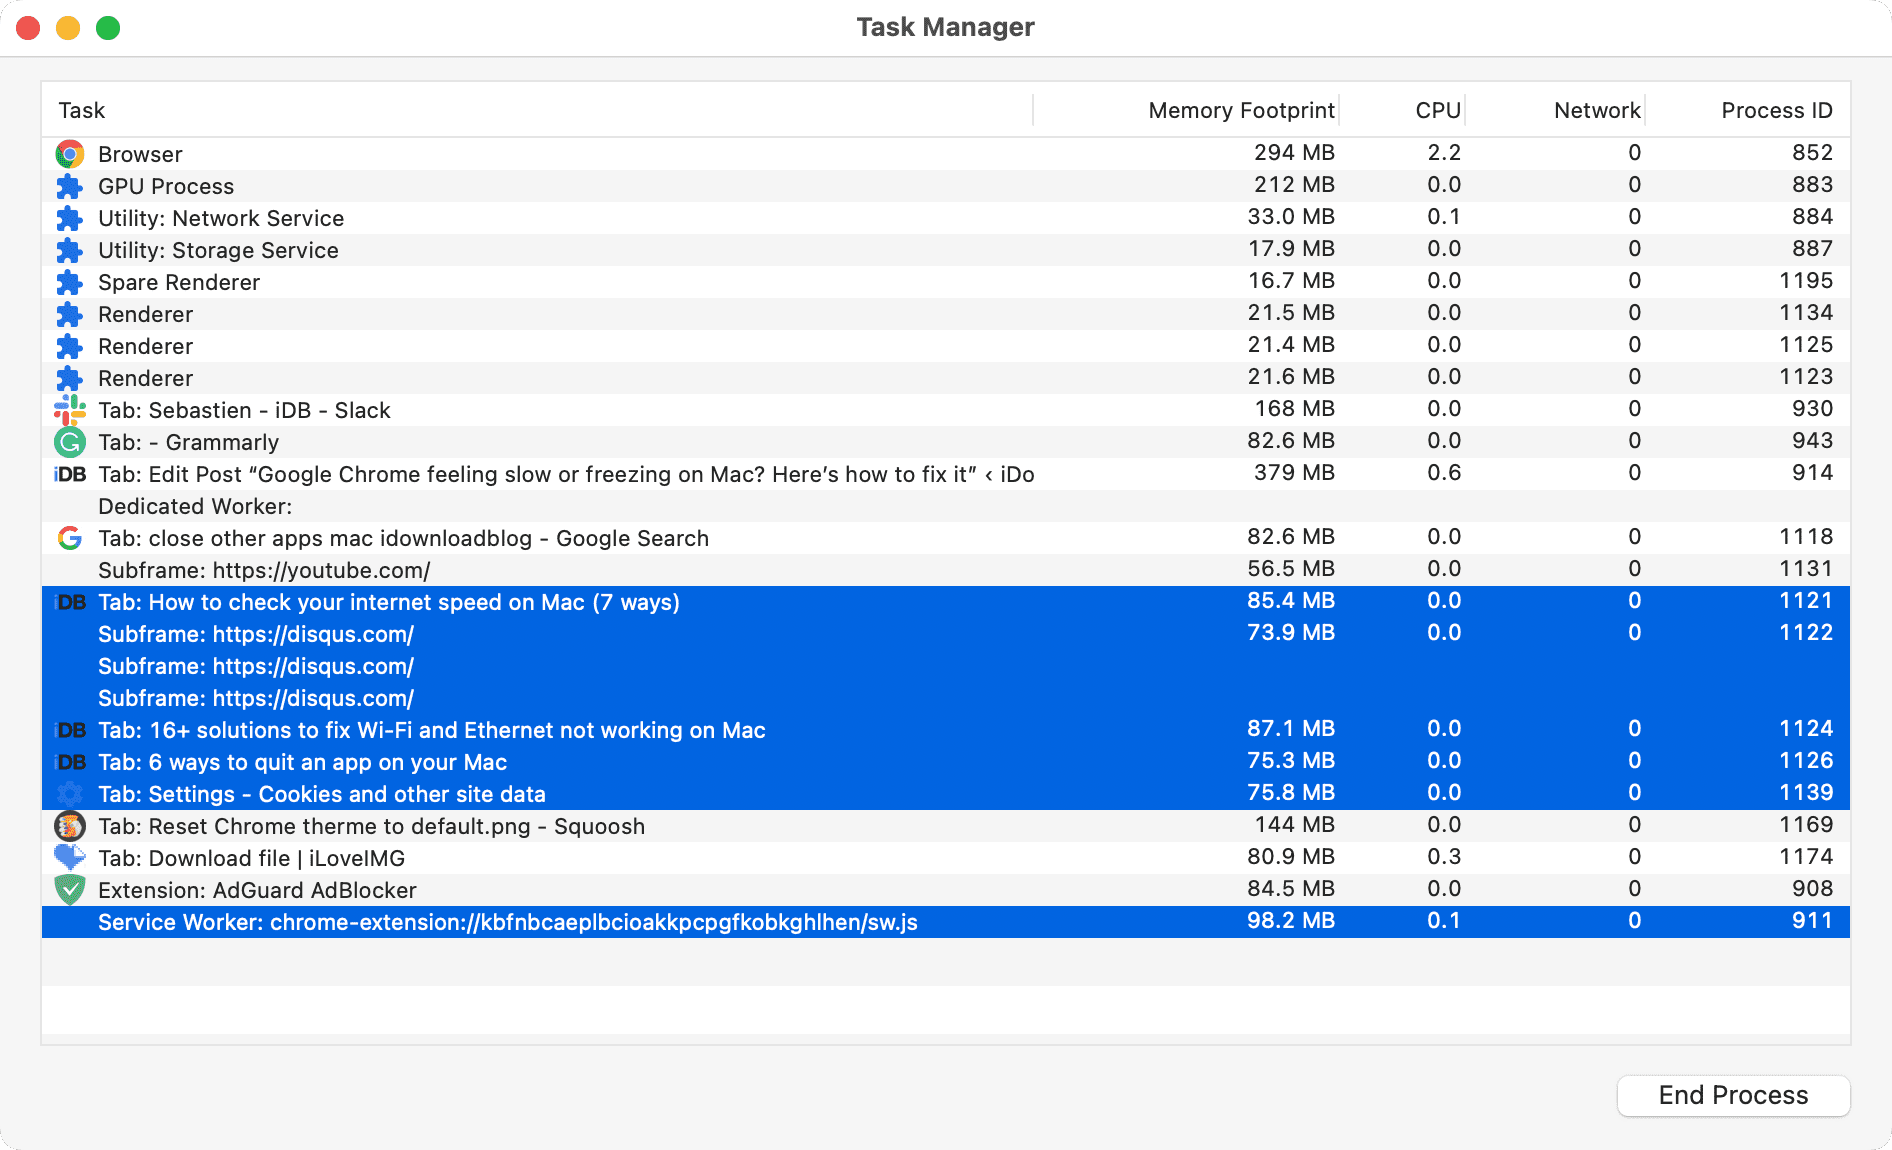 End Process in Chrome Task Manager